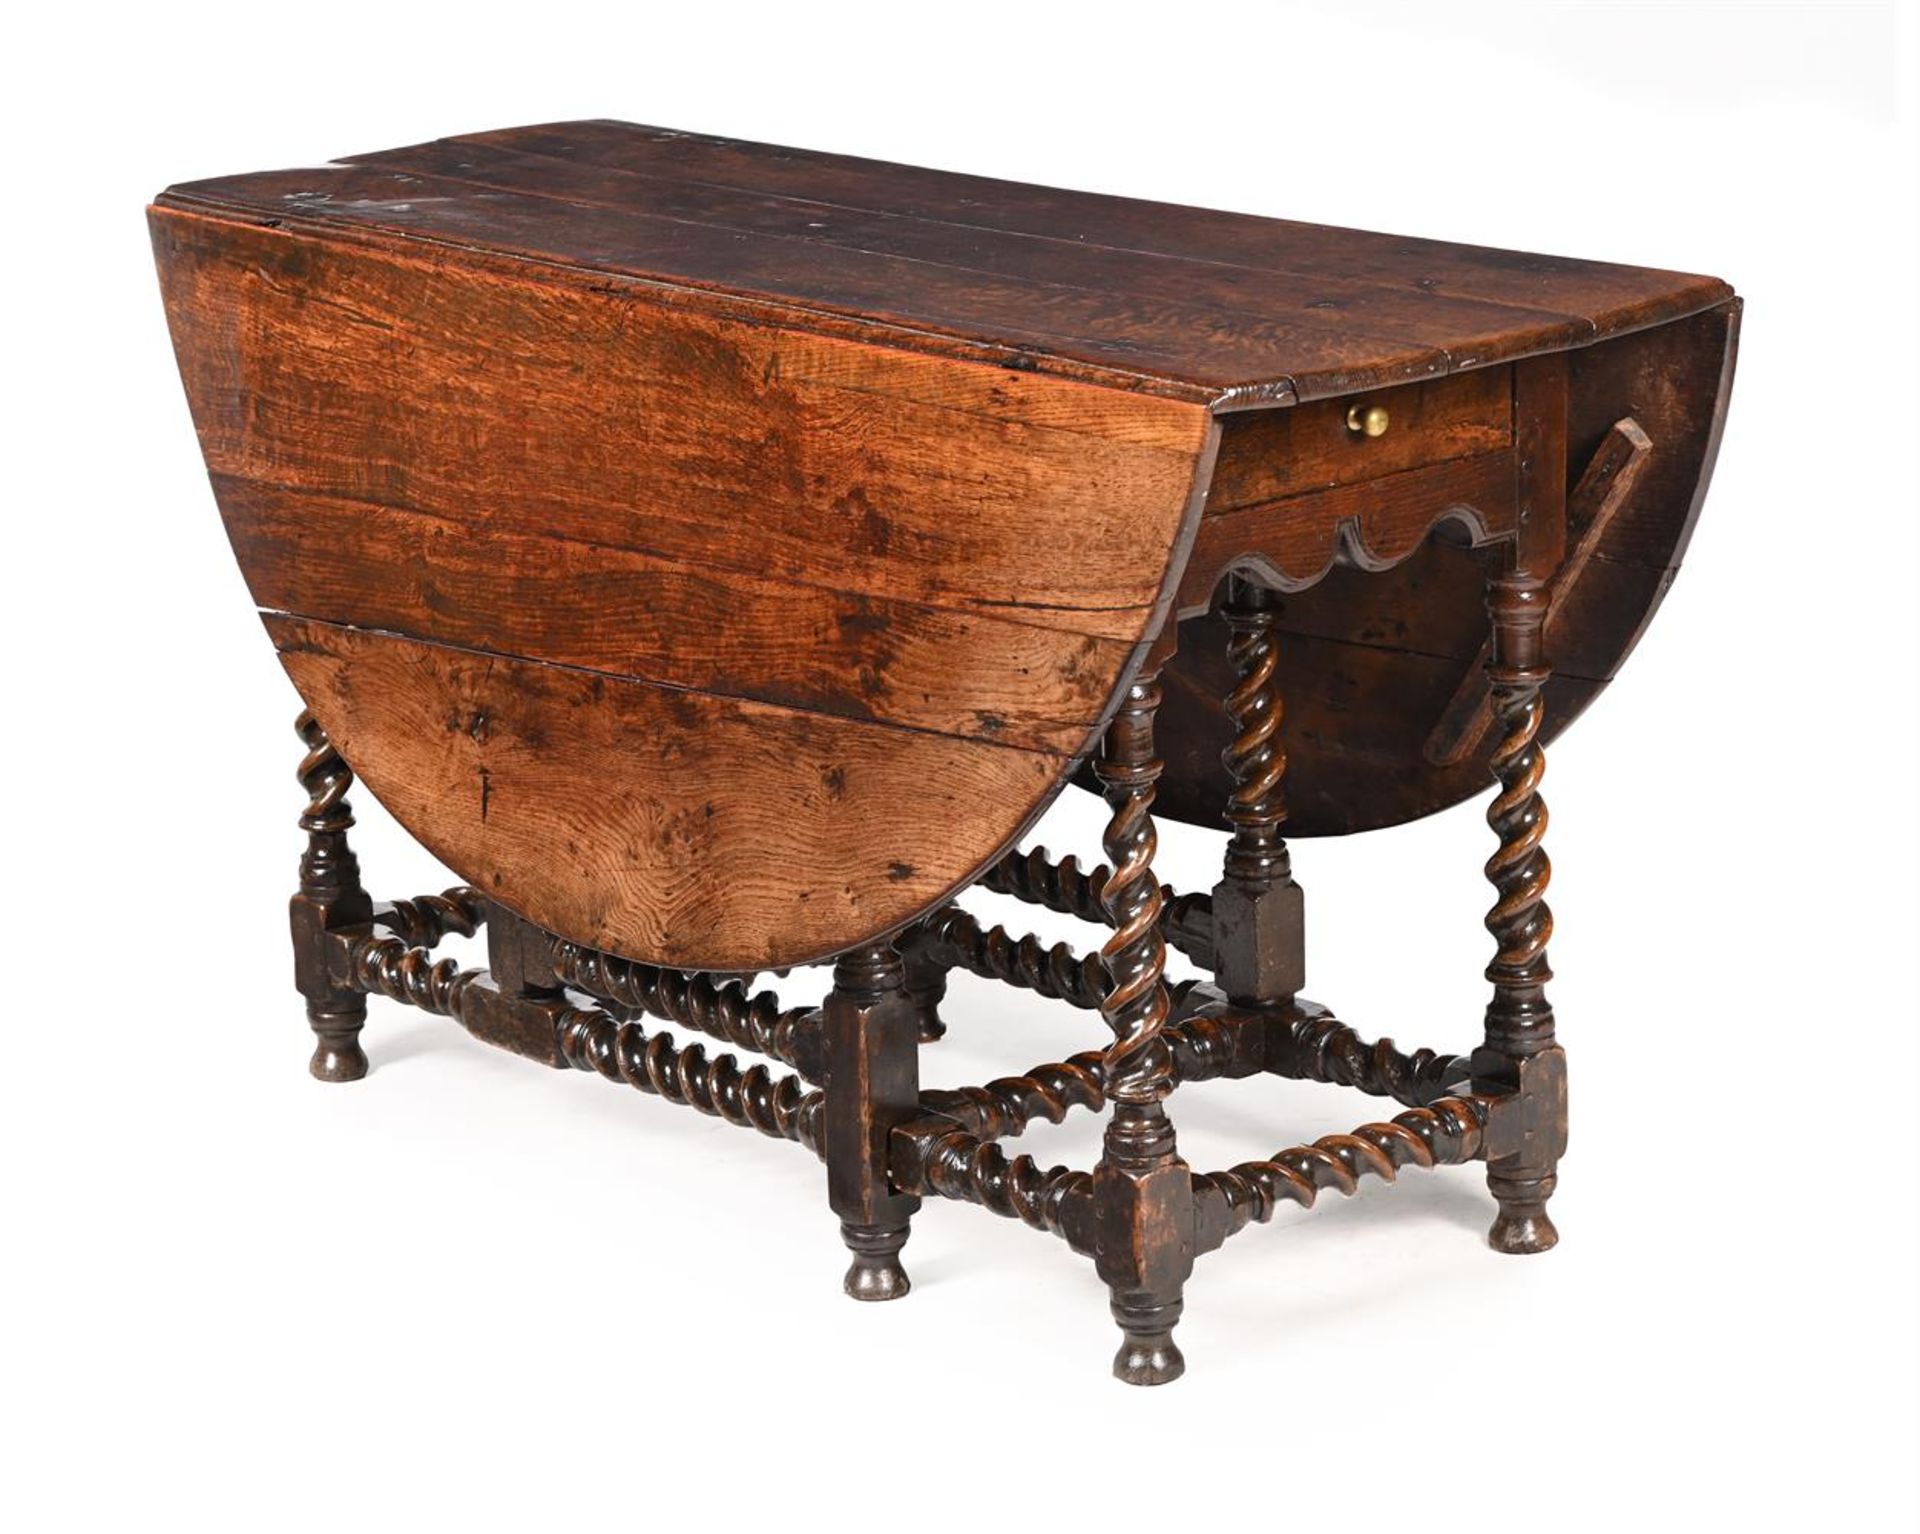 A LARGE OAK GATELEG DINING TABLE FIRST HALF, 18TH CENTURY - Image 2 of 3